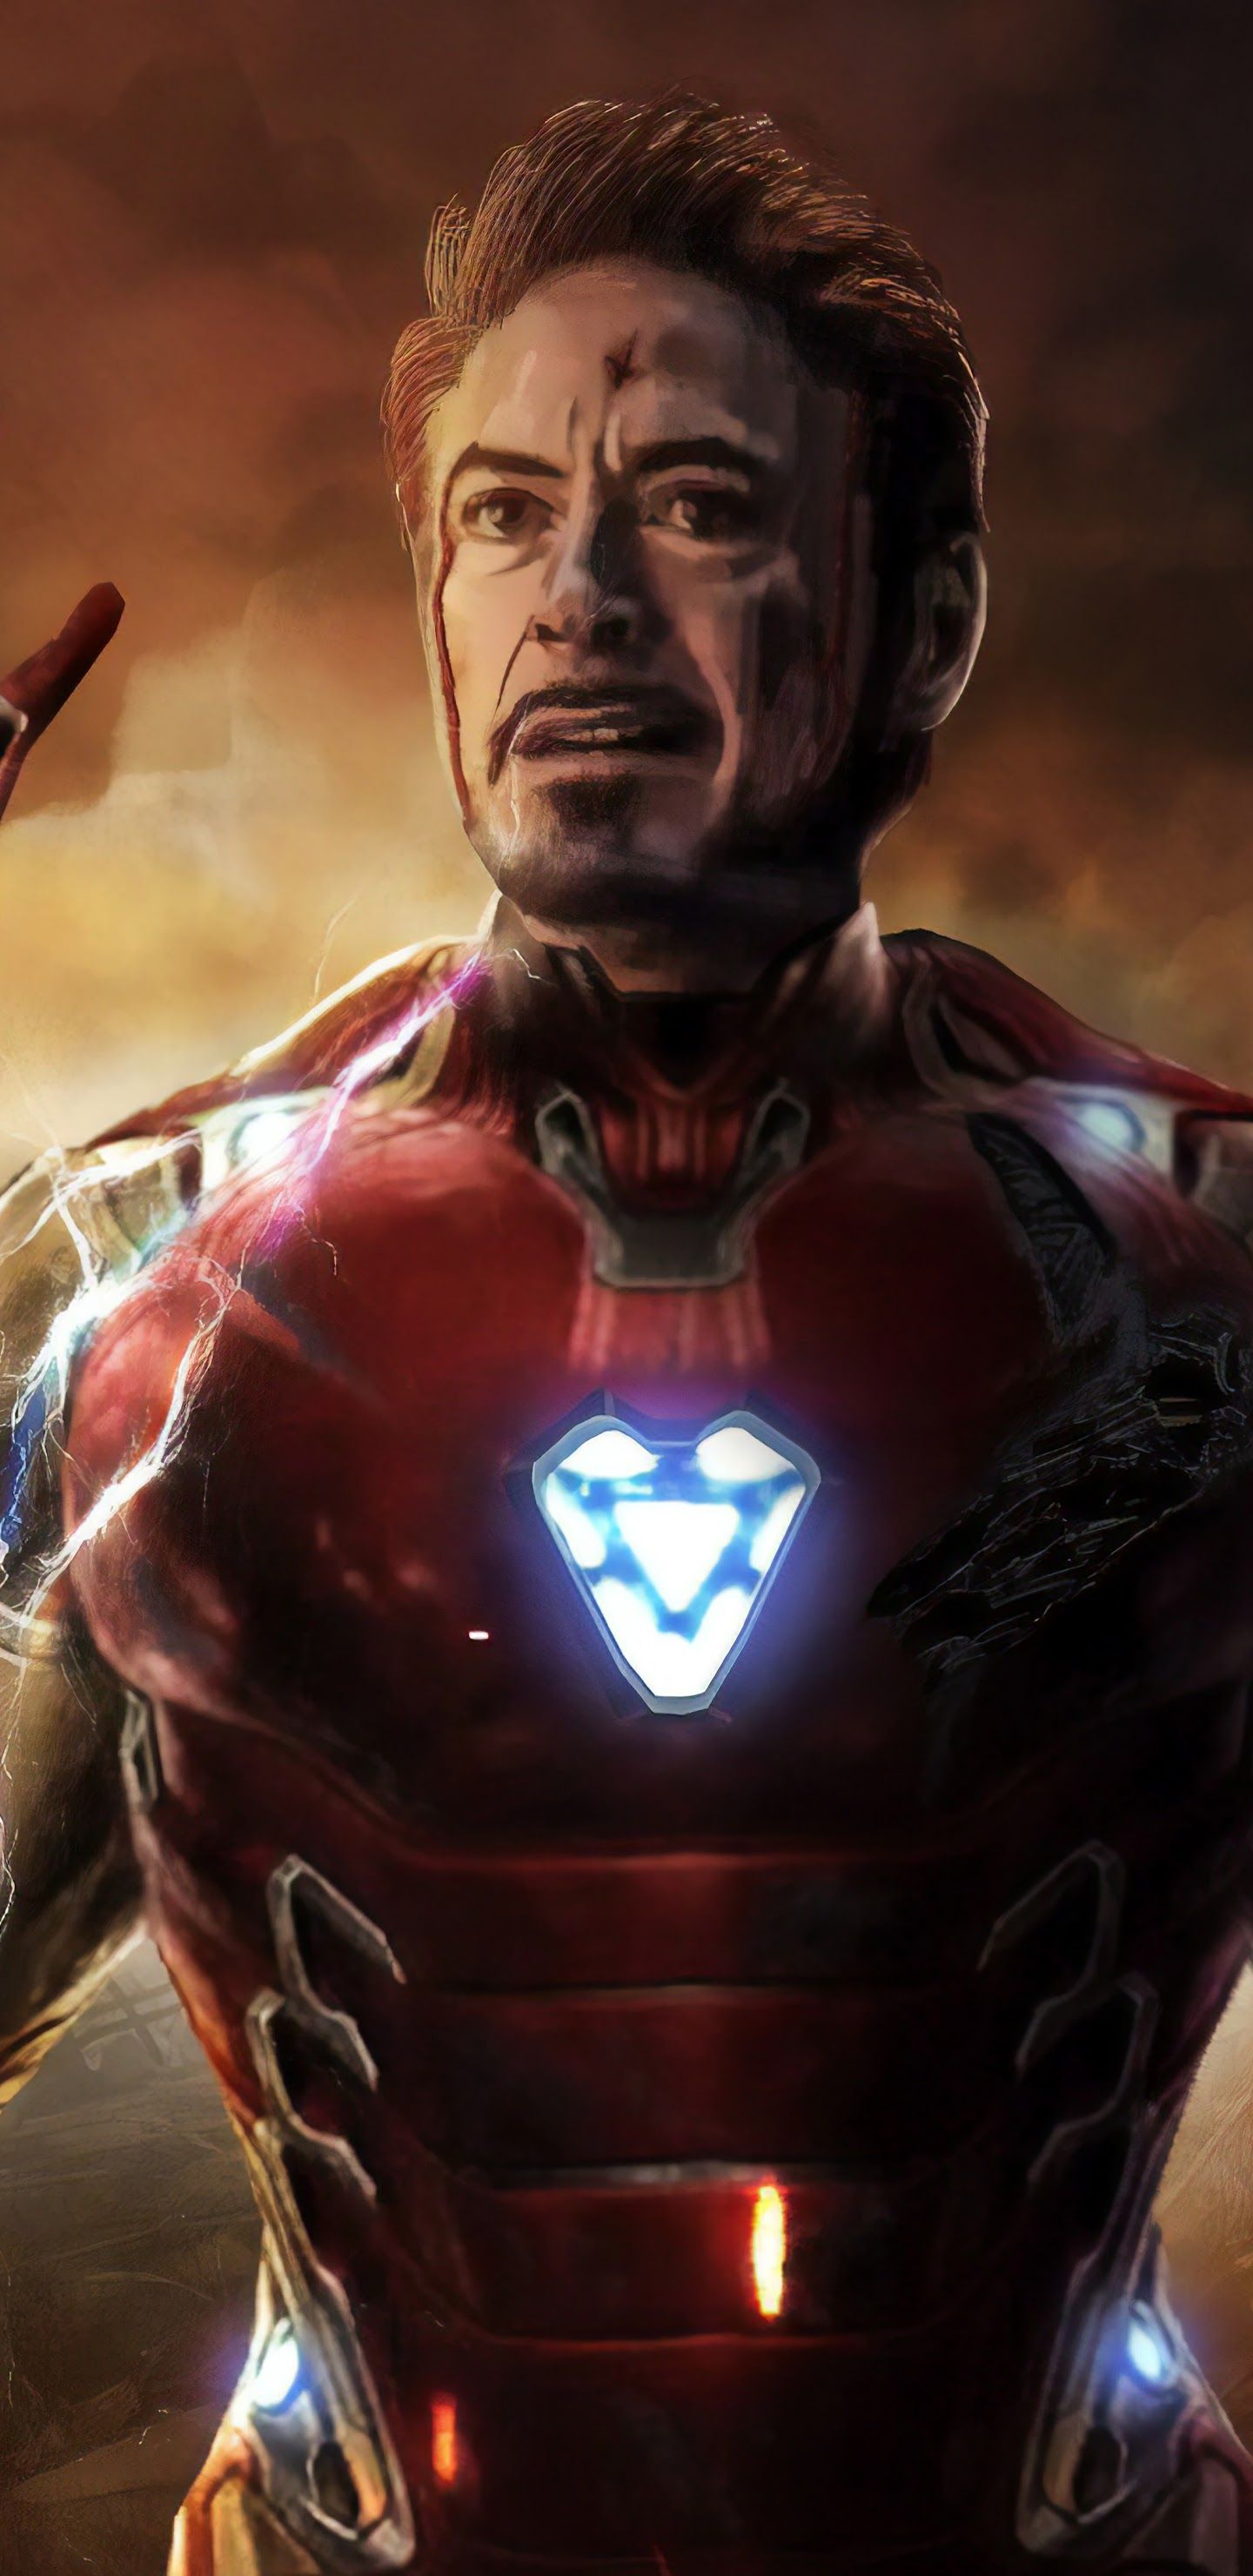 Iron Man Wallpapers Iphone 11 Pro Max